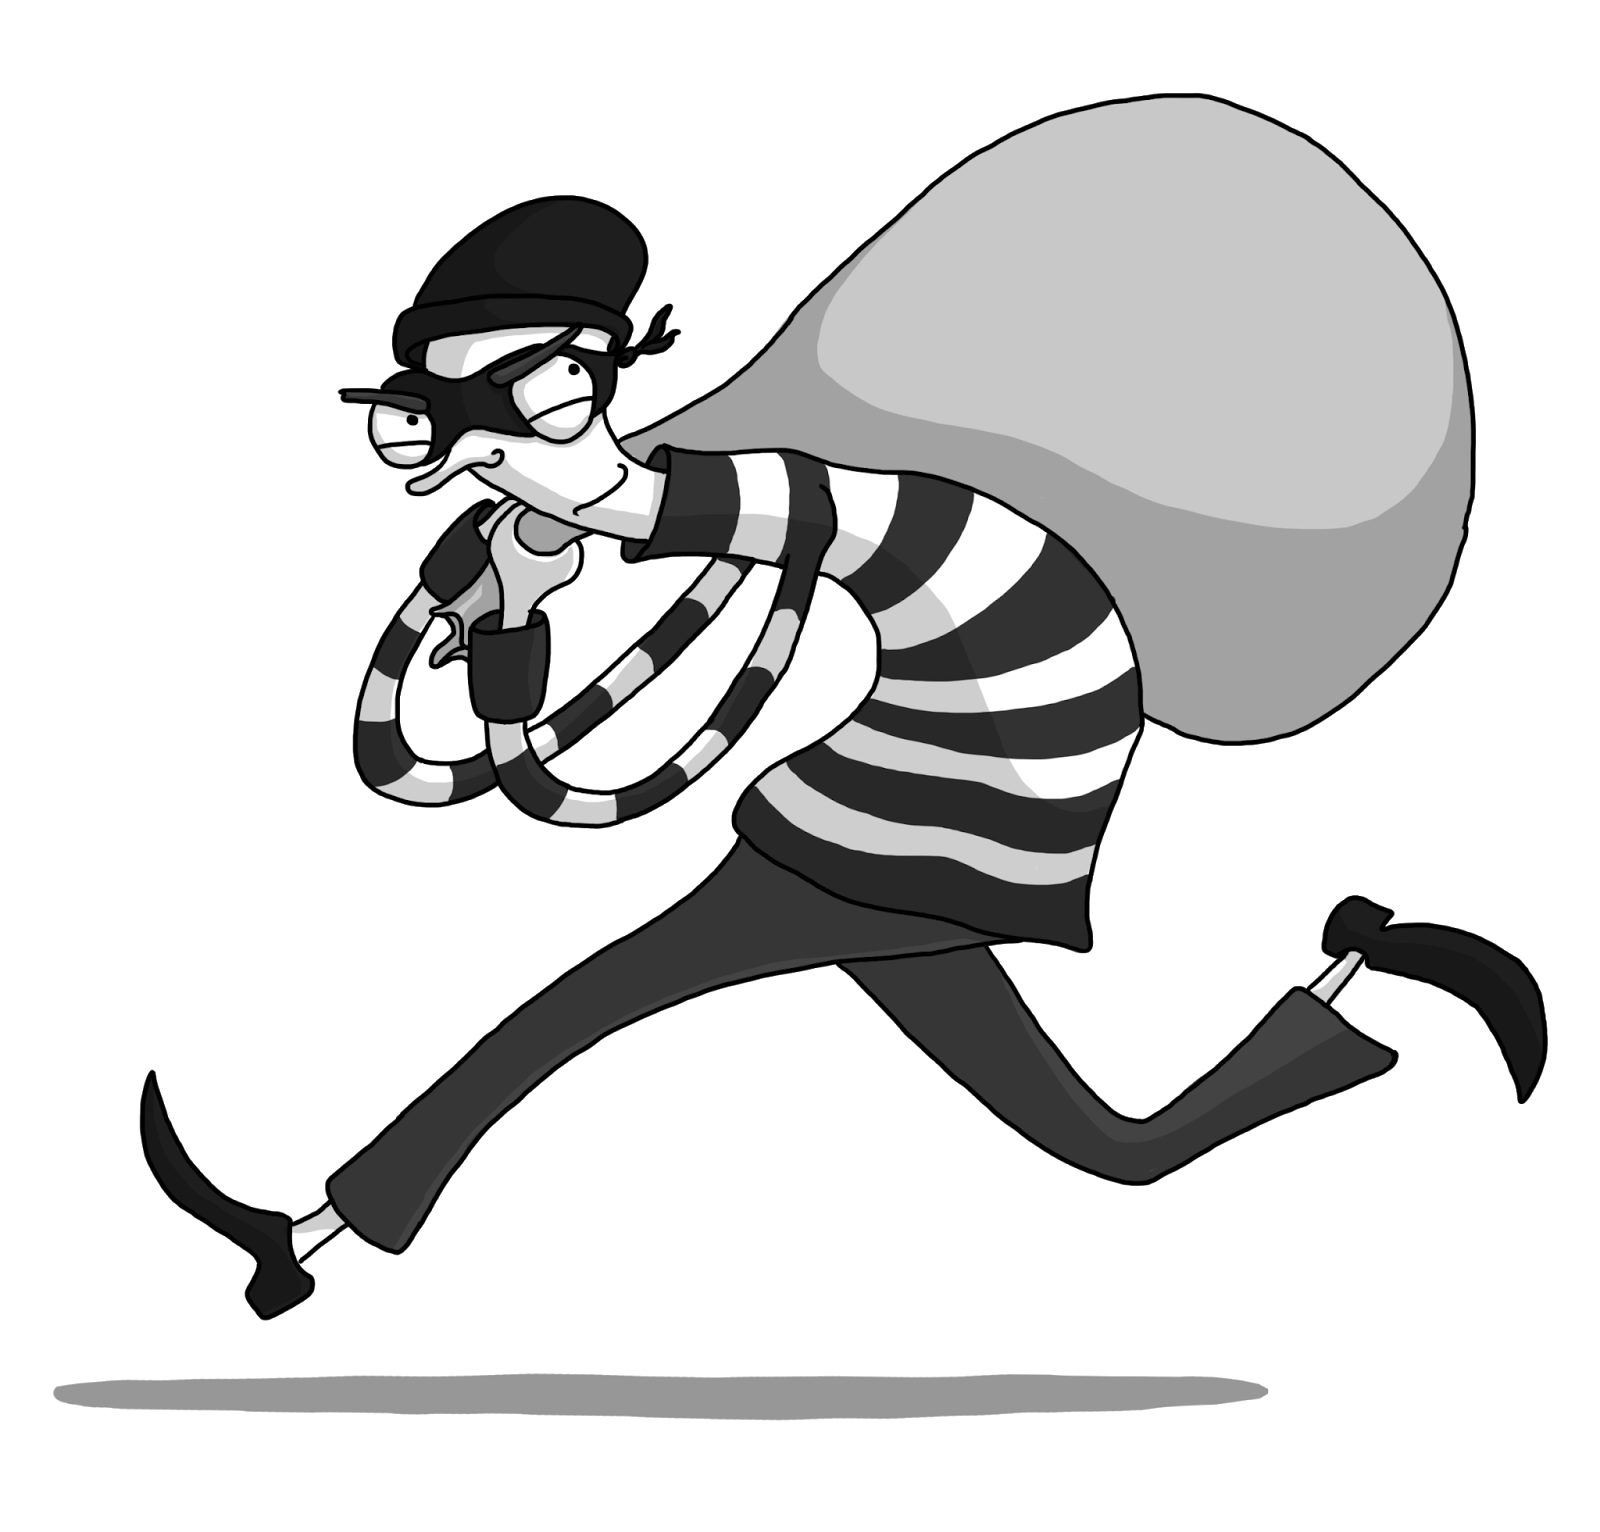 Related Robber PNG Images.